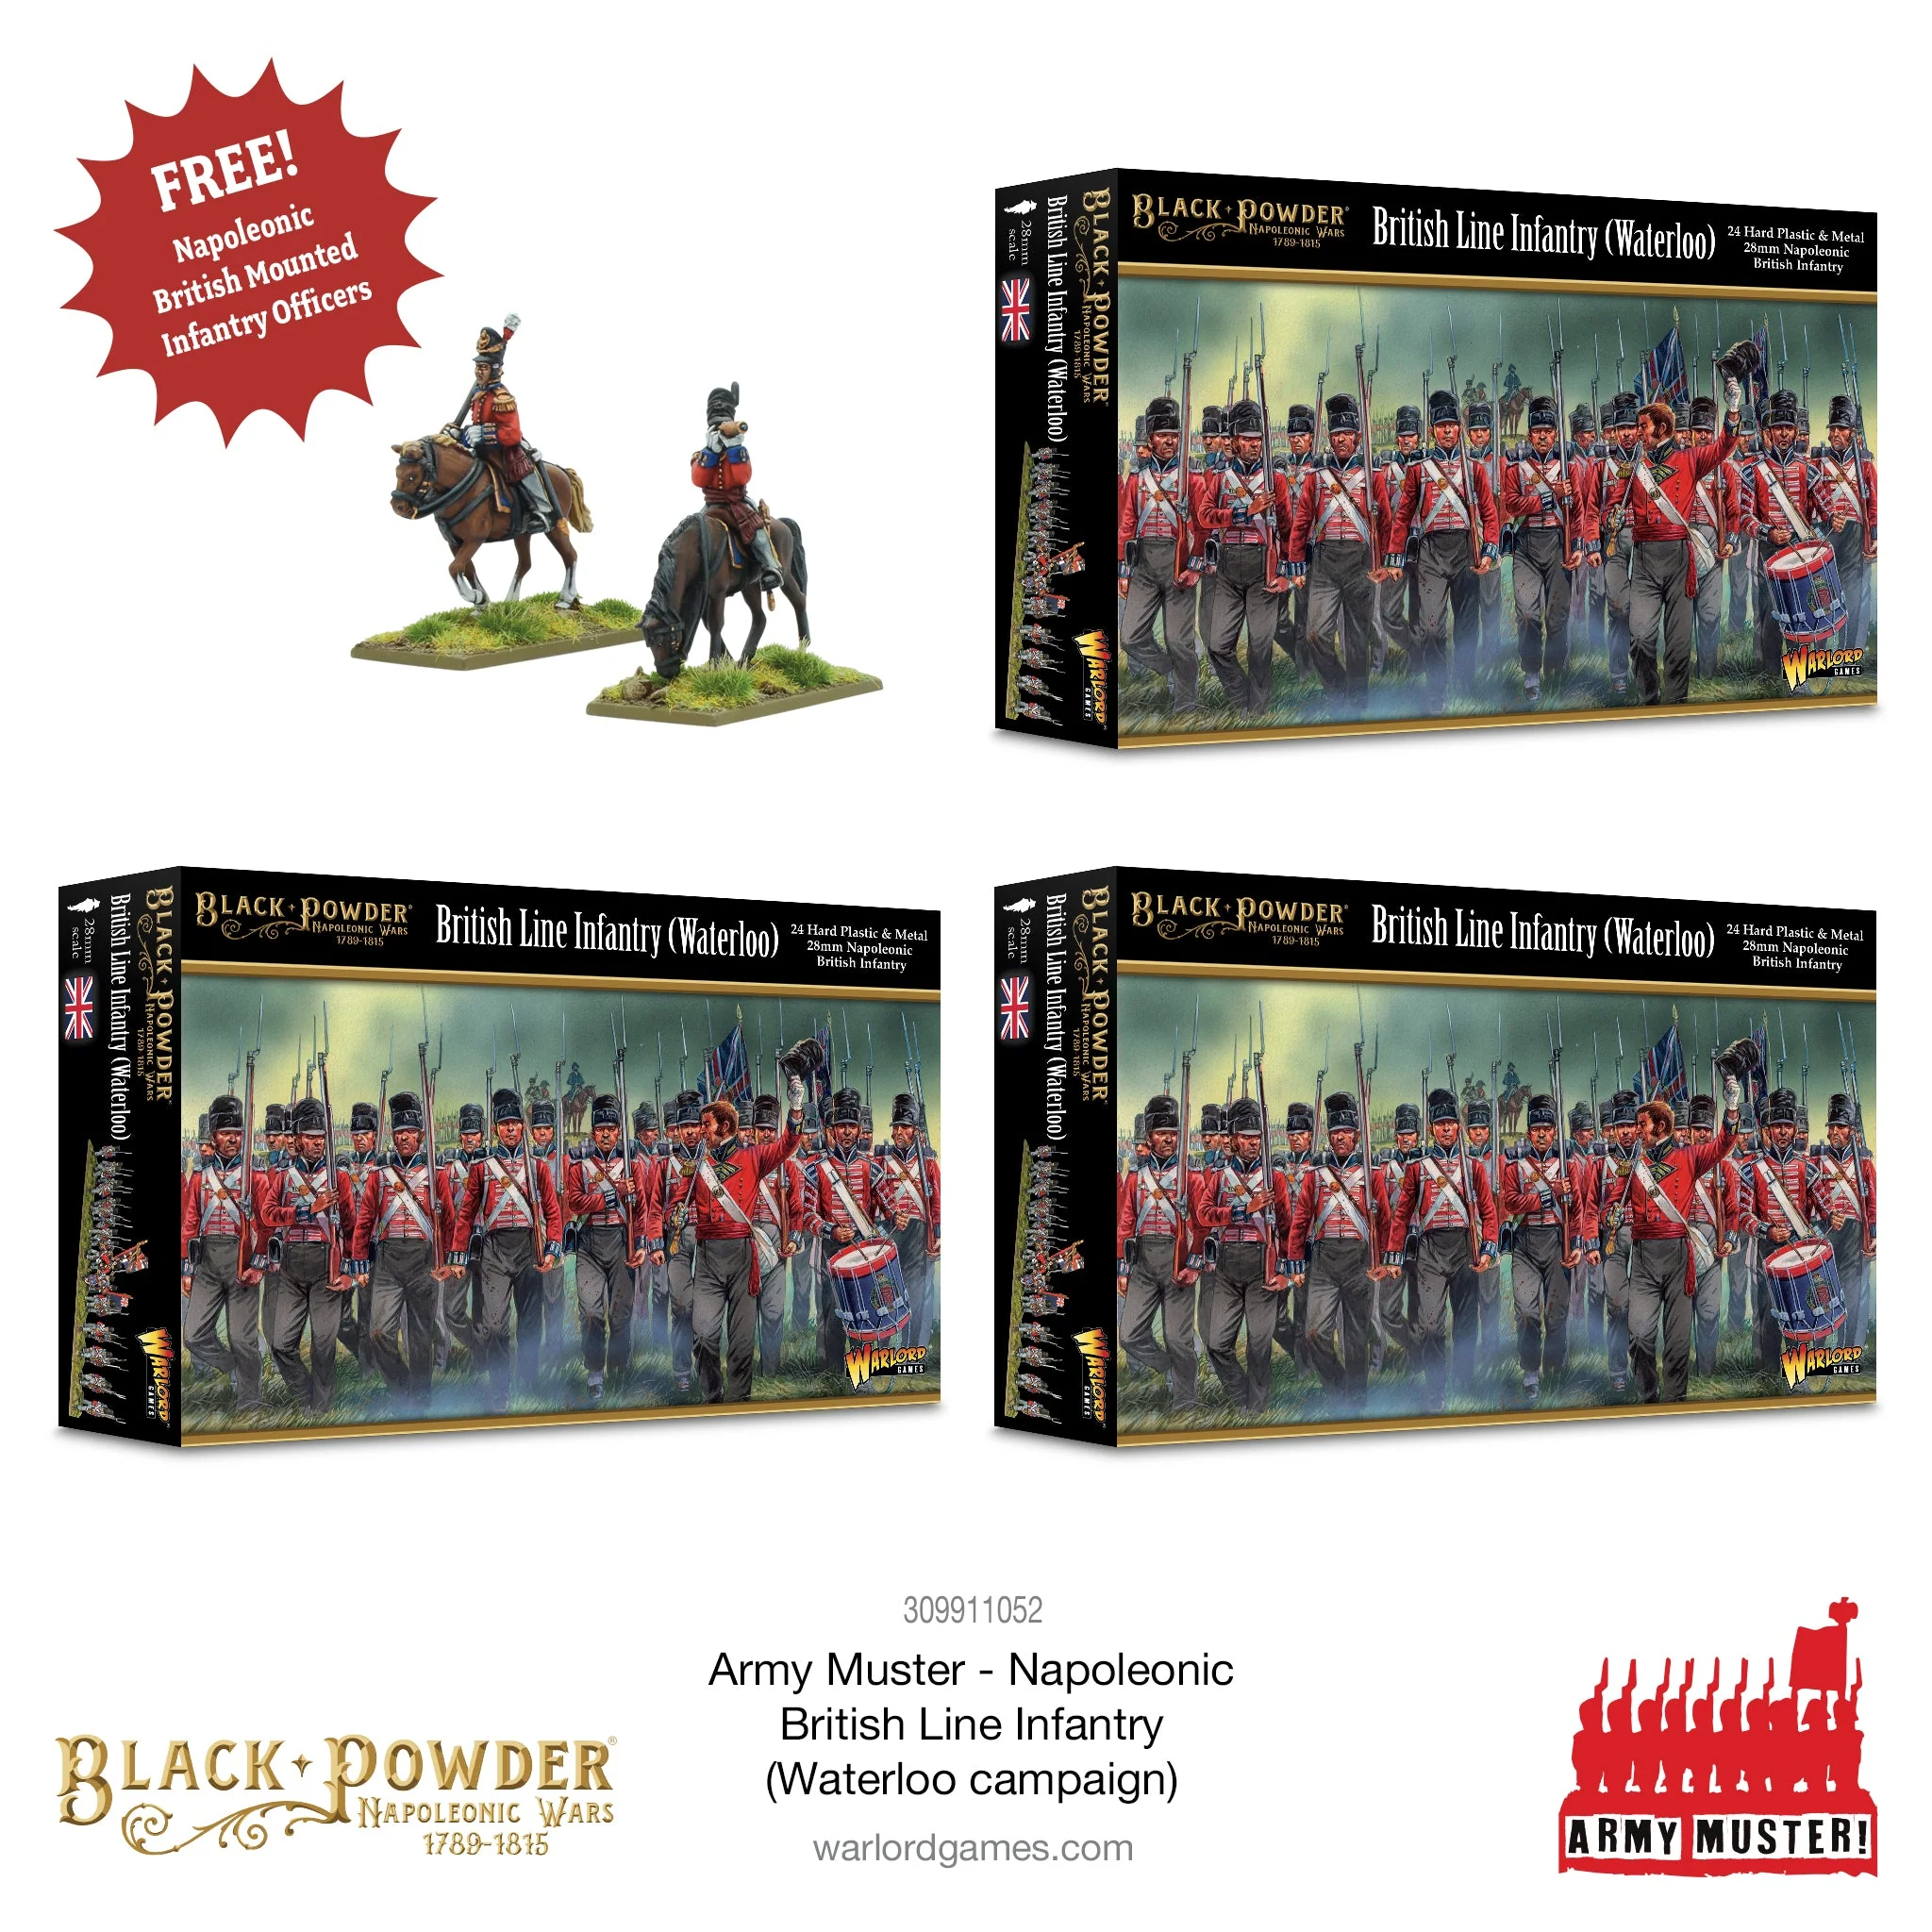 Army Muster: Napoleonic British Line Infantry (Waterloo Campaign)-1710240322-bojye.webp